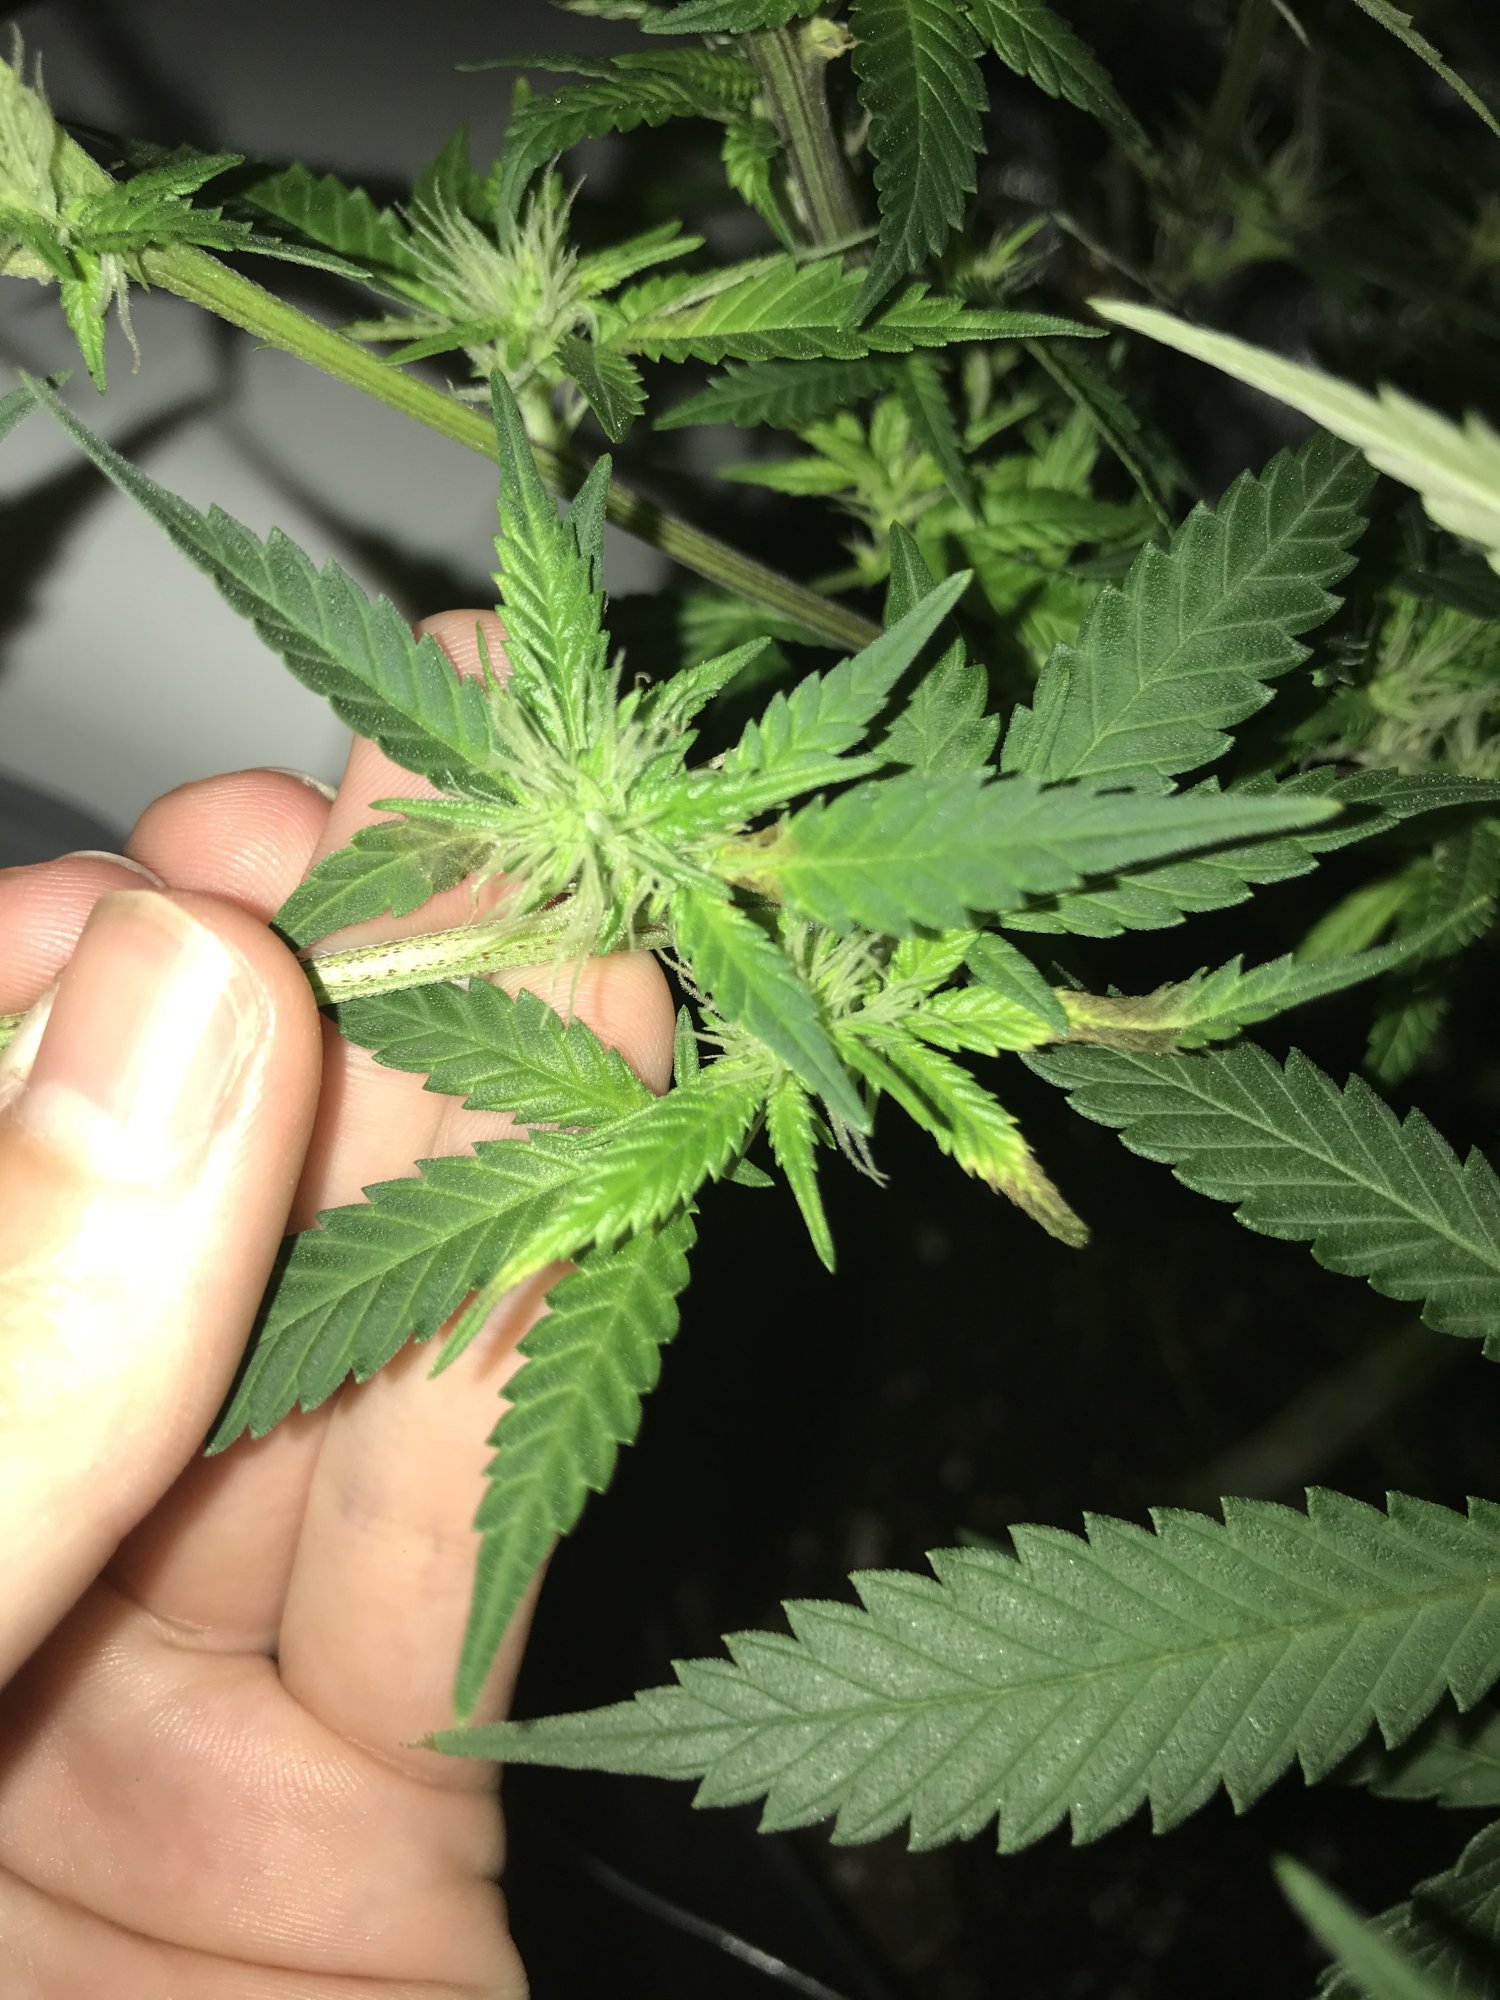 Weird browning on female plant wk3 of flower 2